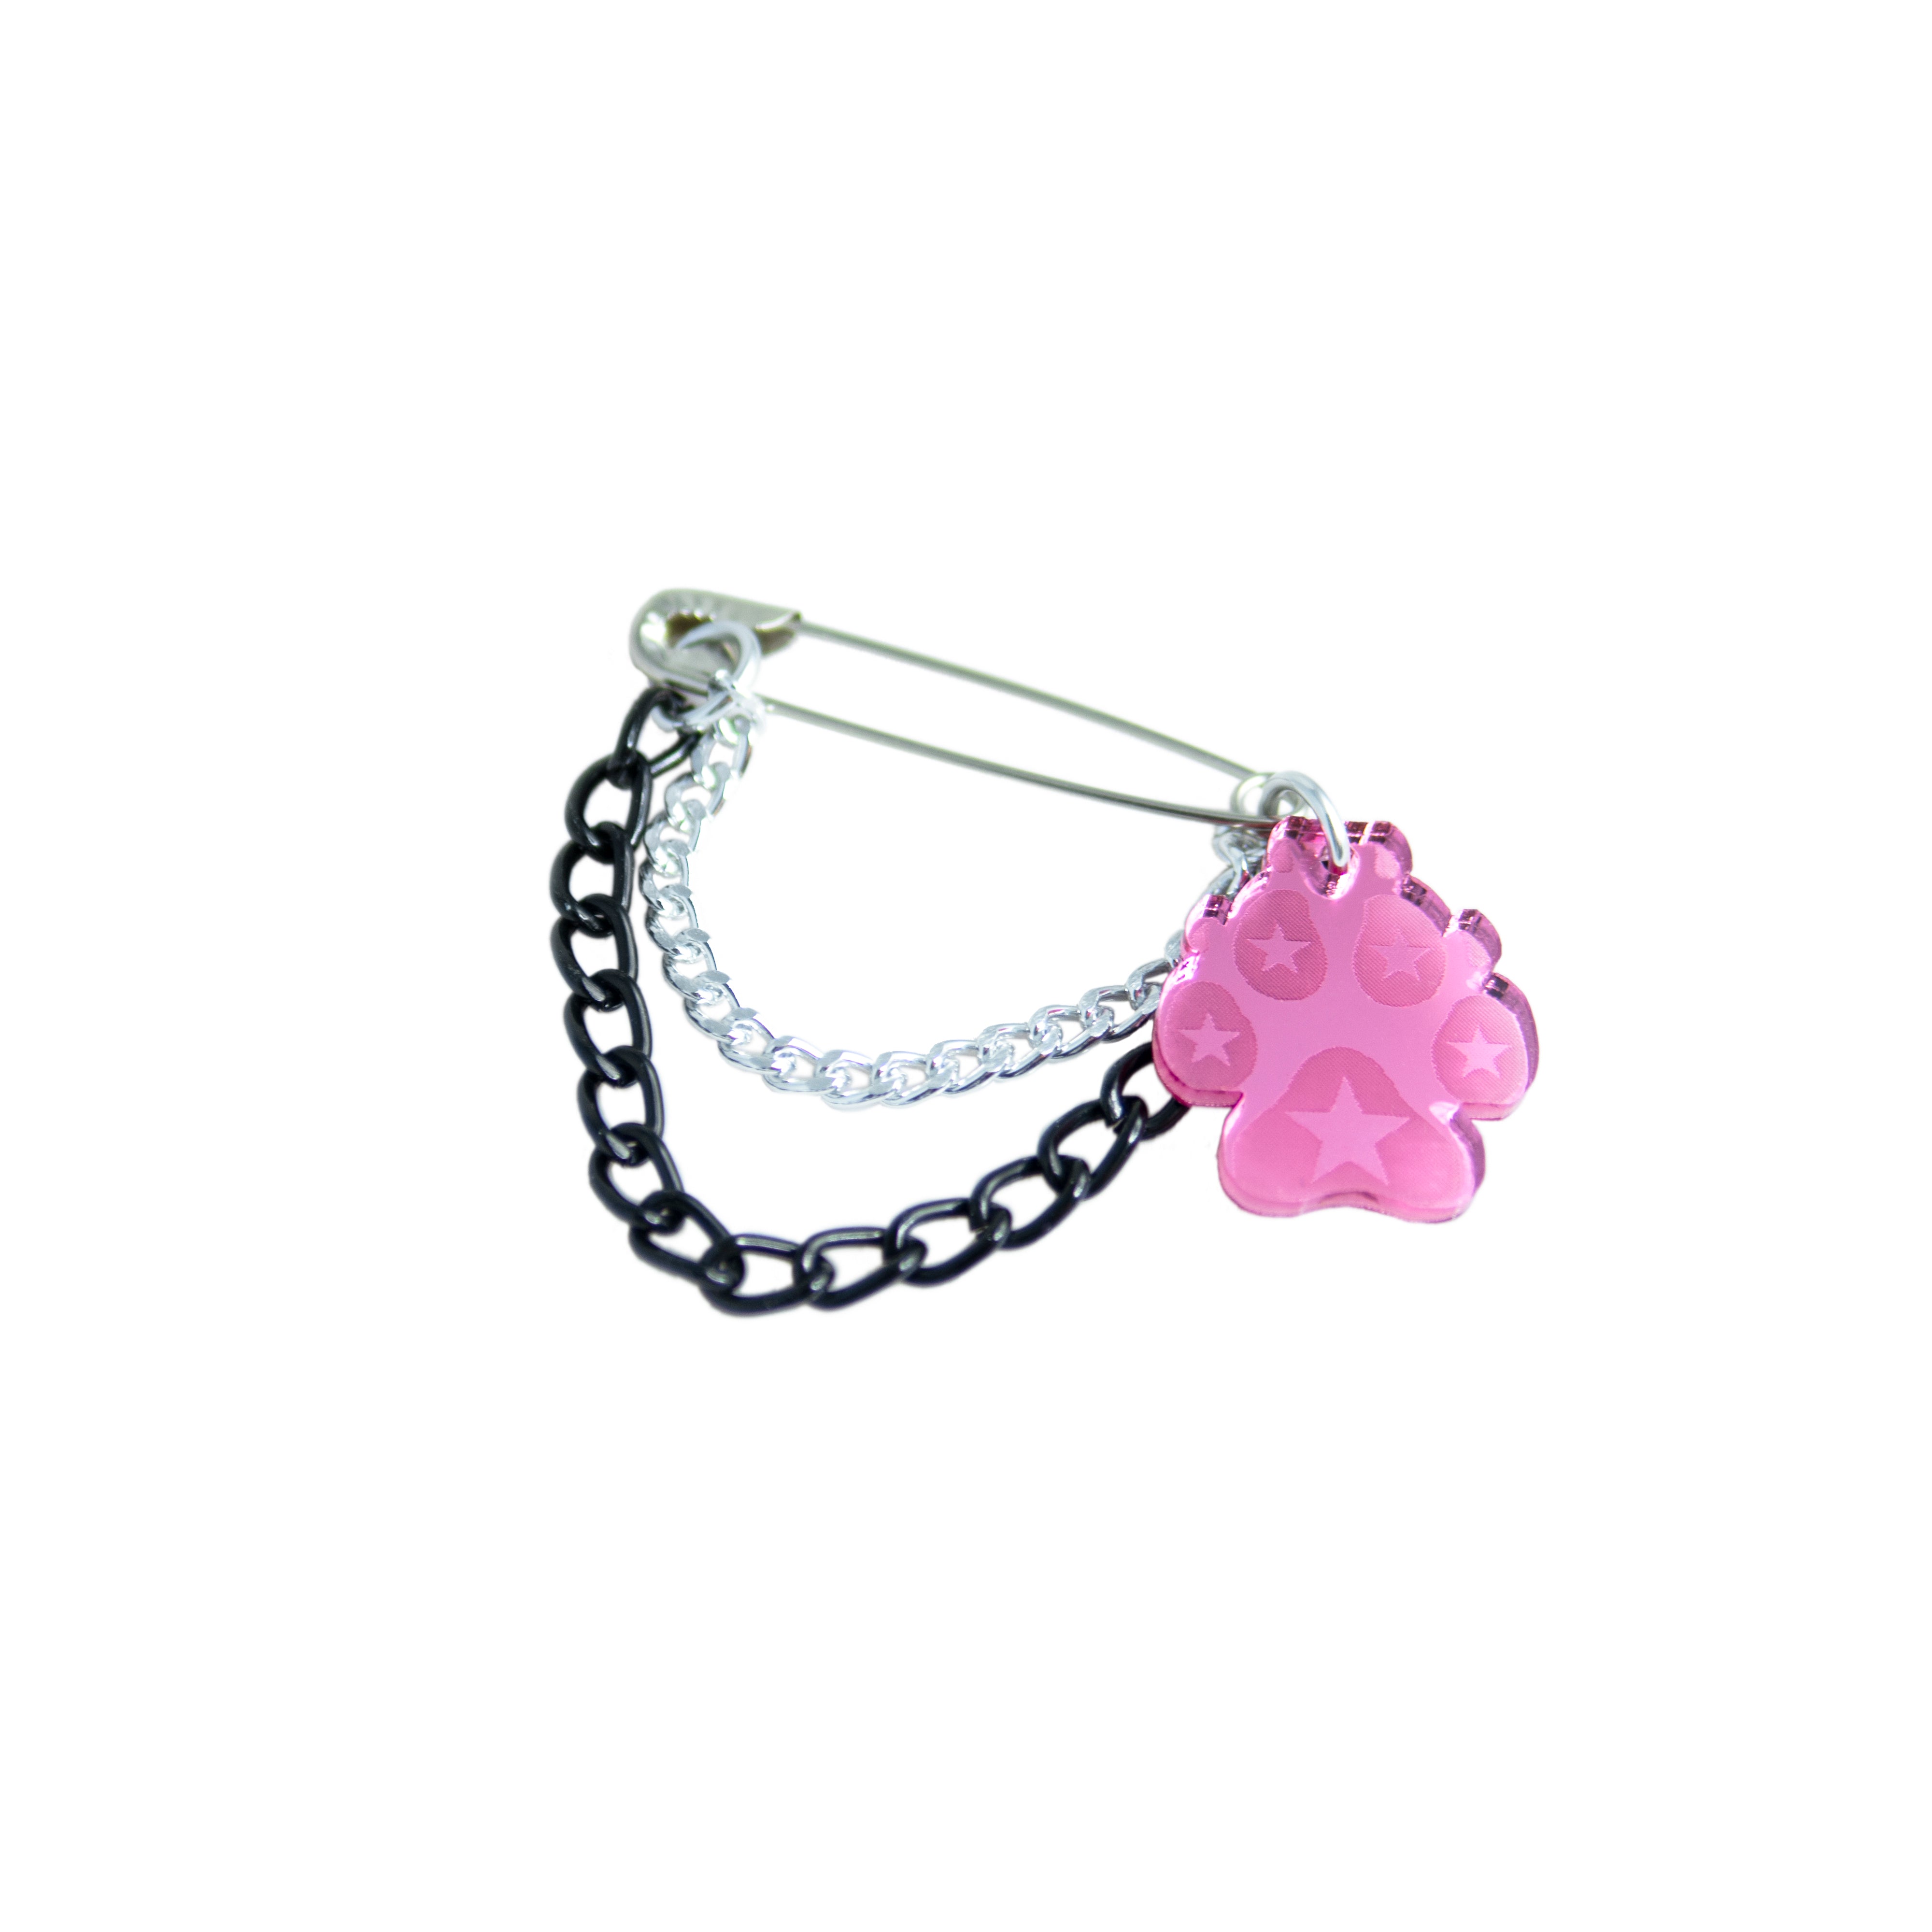 Paw Chain & Charm Pin - Pawstar Pawstar Hat Accessory cosplay, costume, furry, ship-15, swag